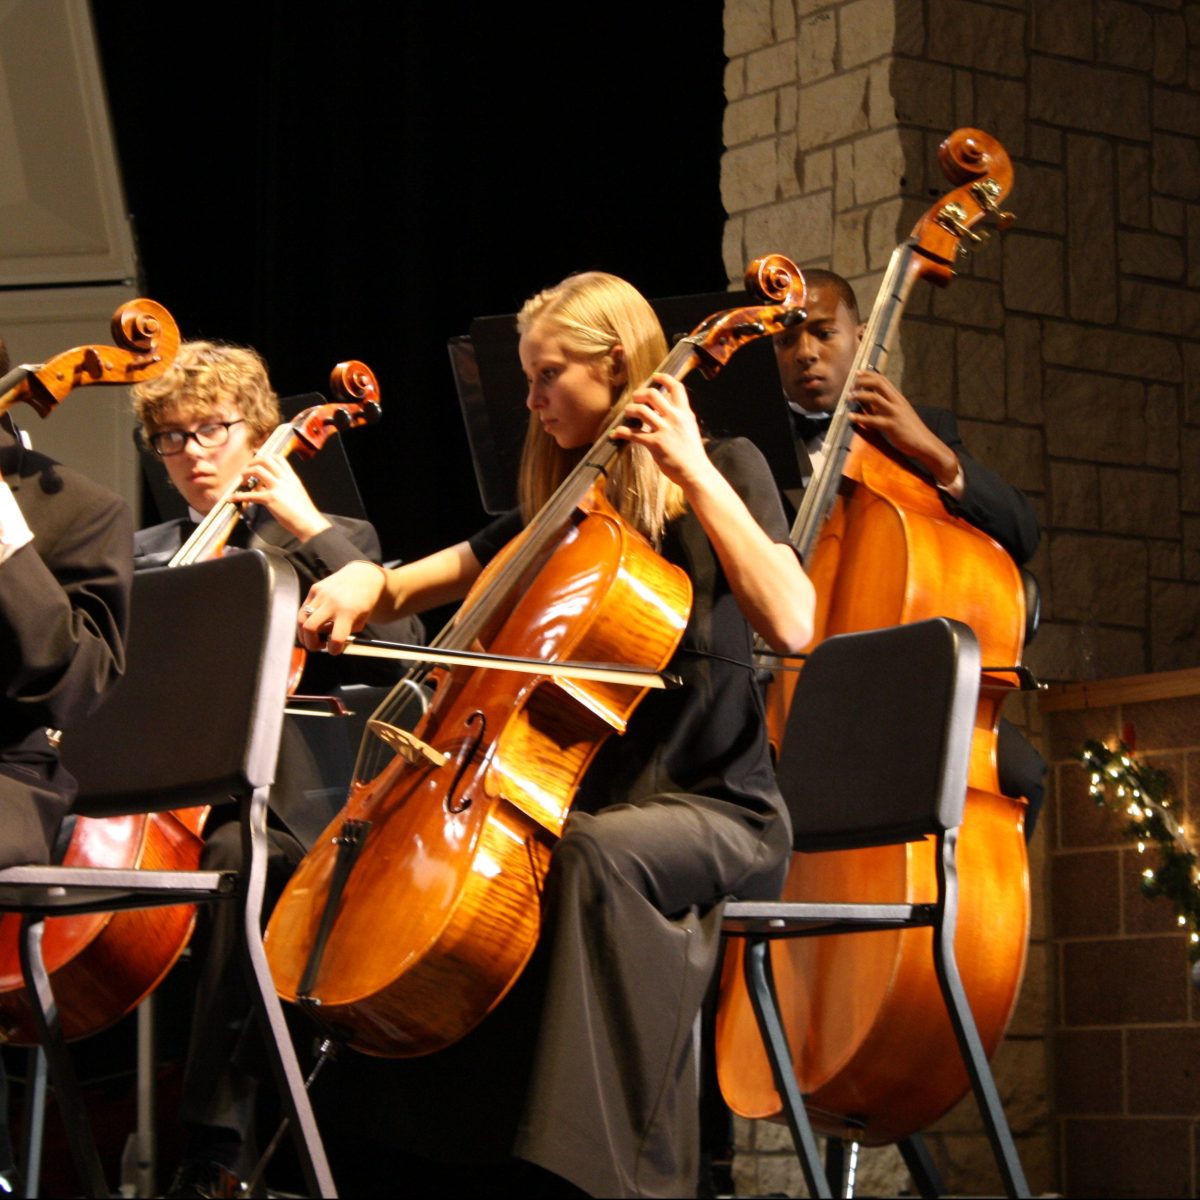 The sights and sounds of the orchestra concert define the happiness of this winter season.